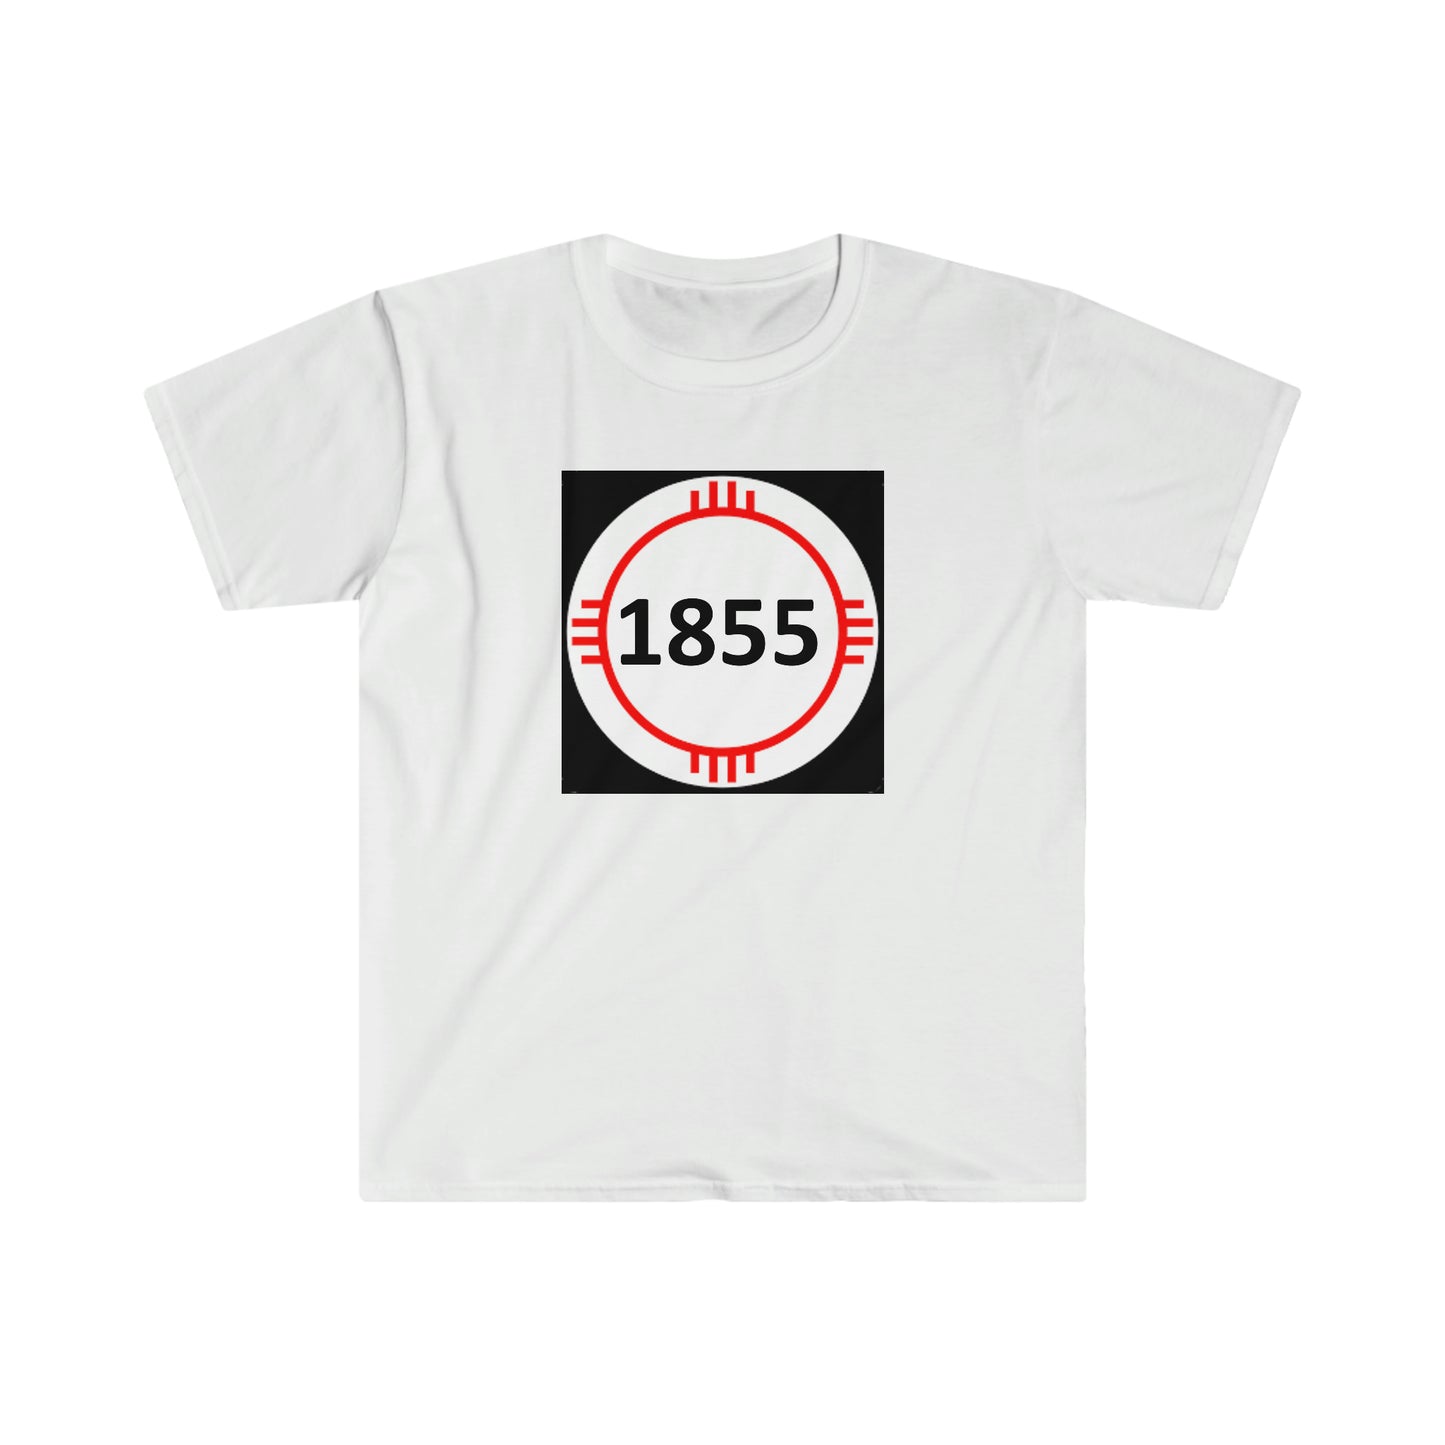 New Mexico State Road 1855 - T-Shirt